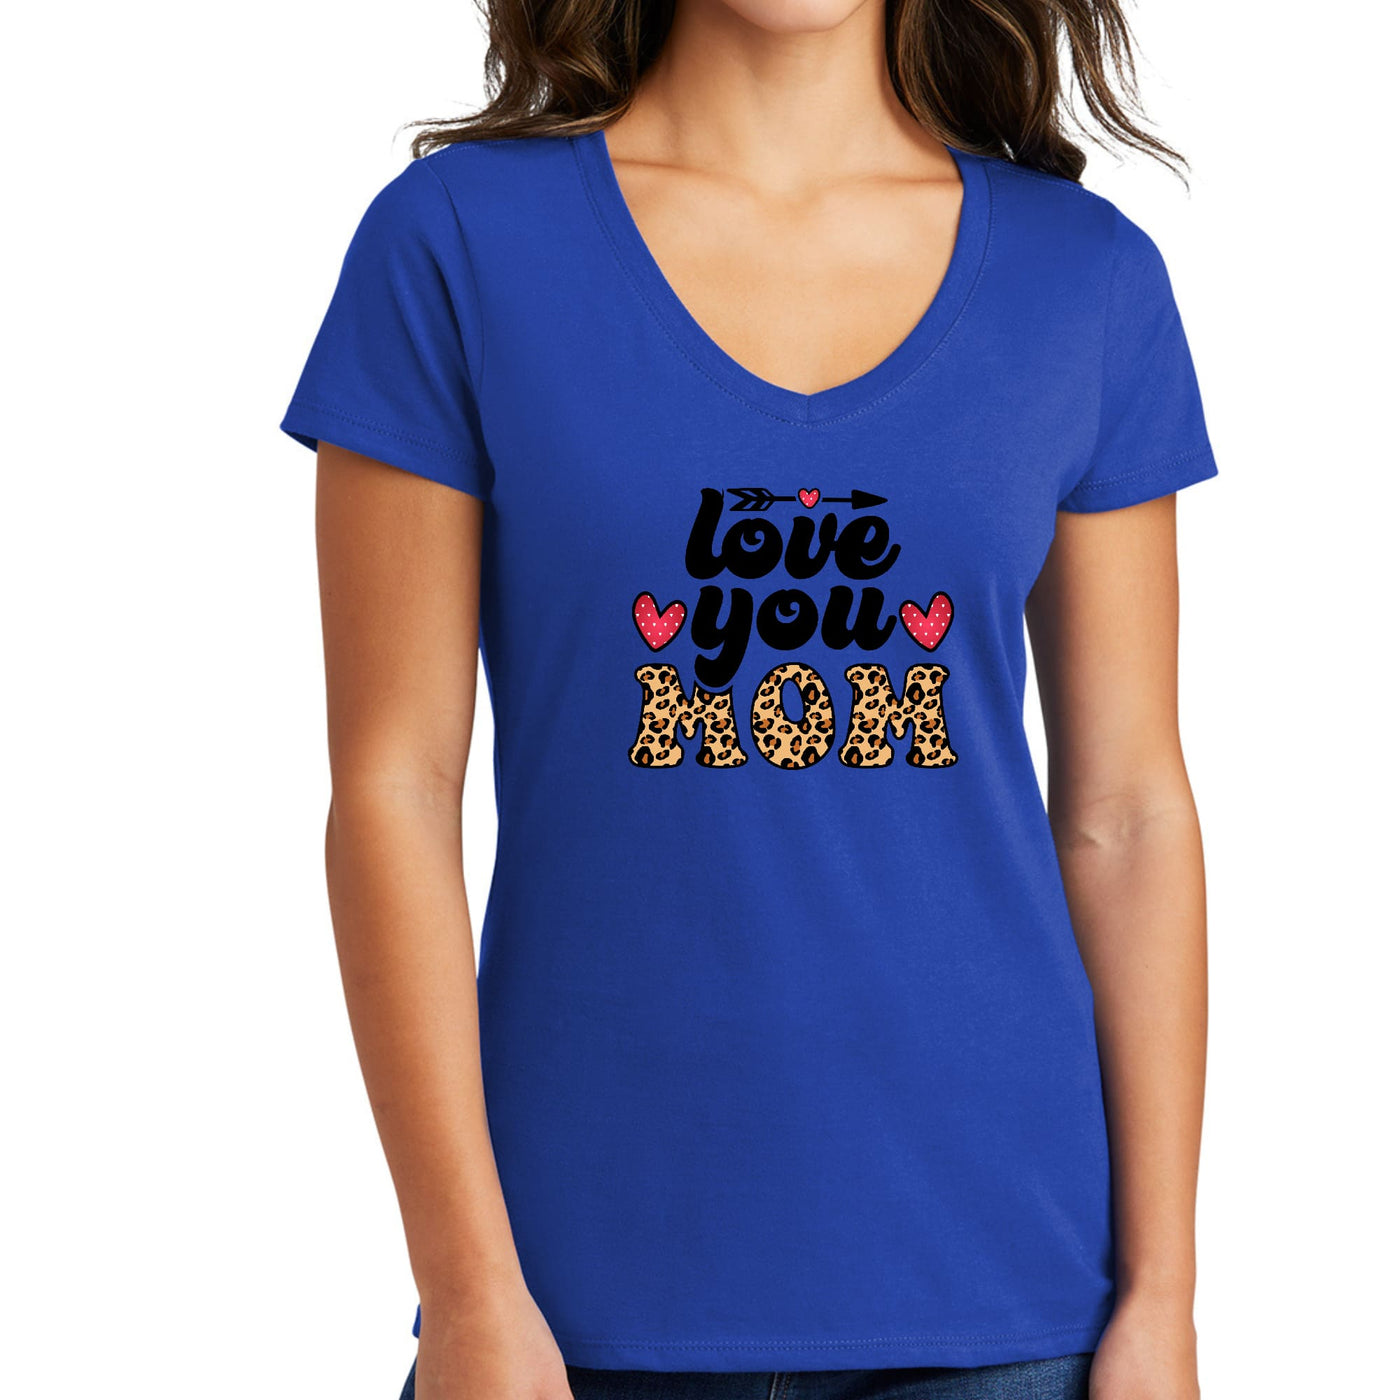 Womens V - neck Graphic T - shirt Love You Mom Leopard Print - Womens | T